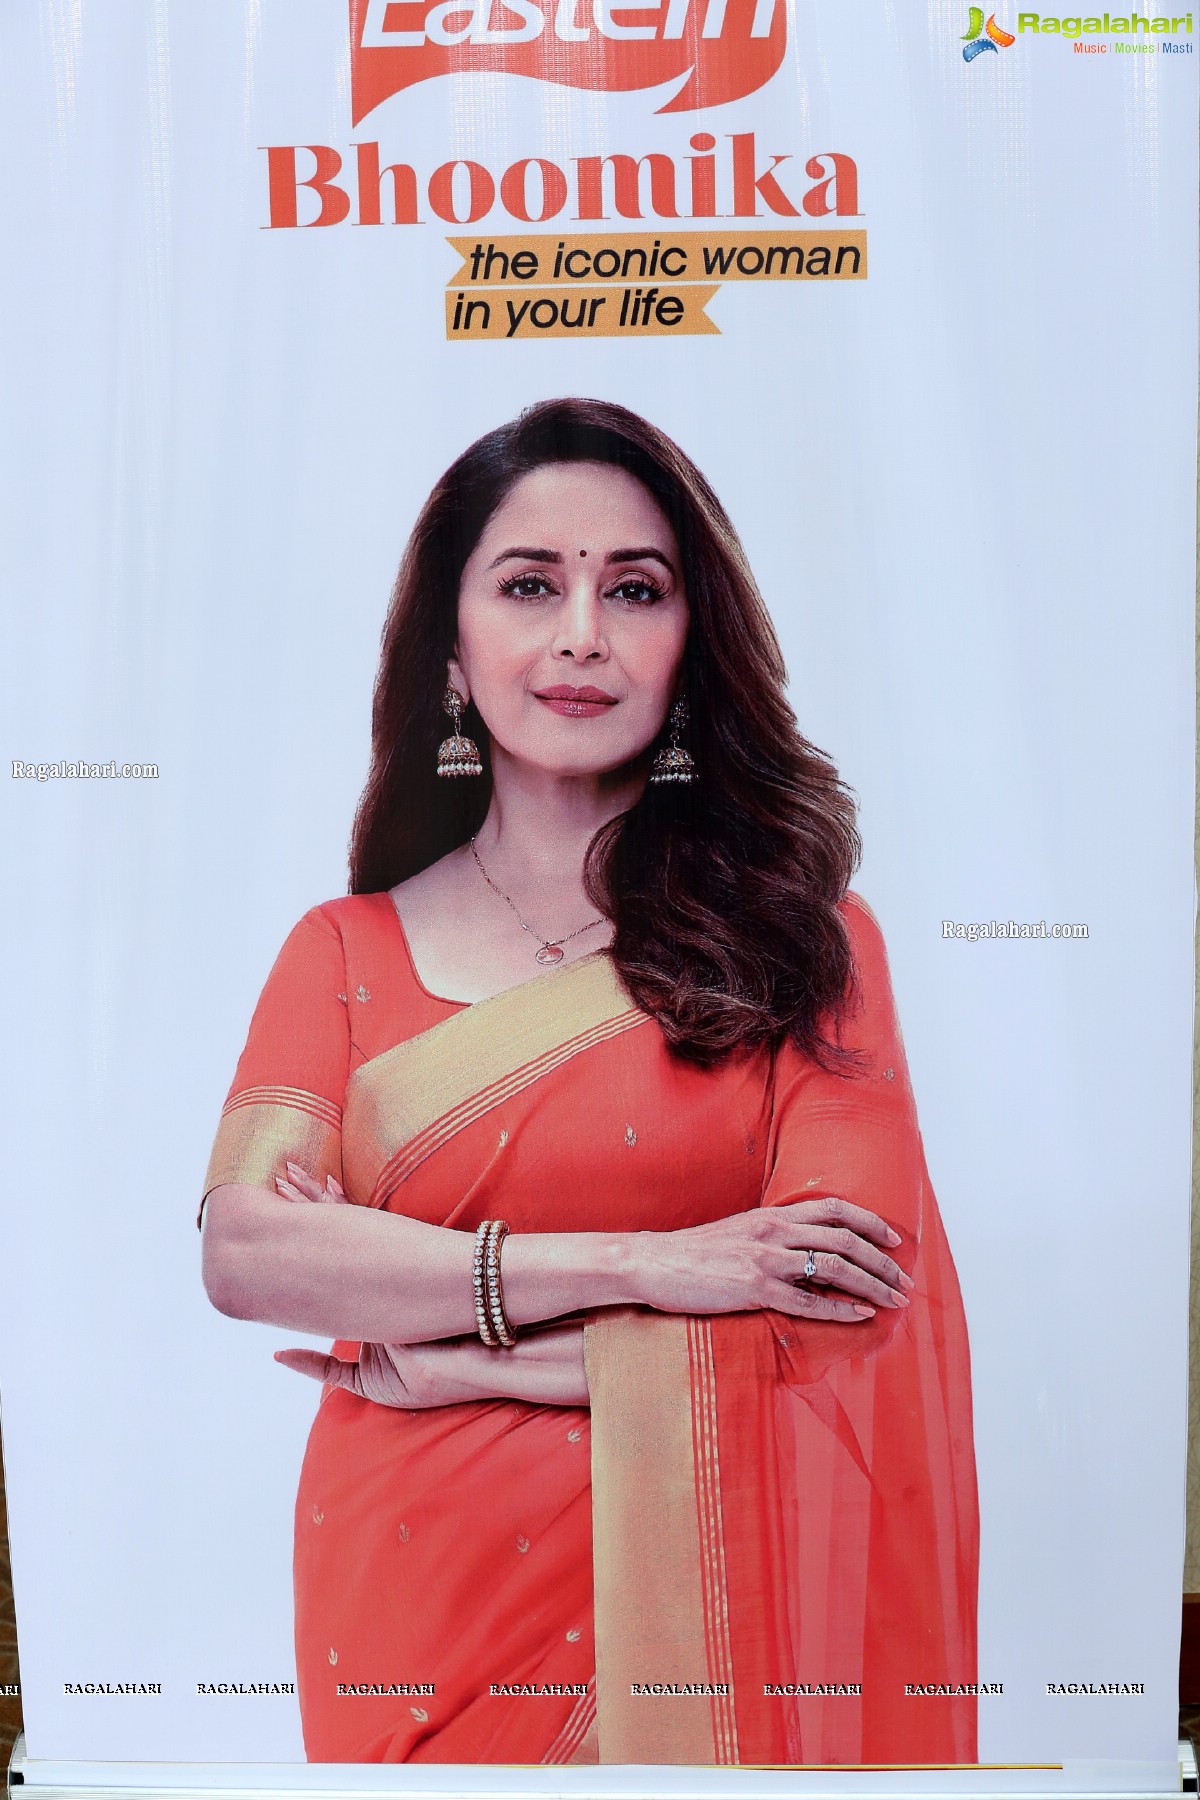 Eastern Bhoomika Awards 2020 presented by Eastern Condiments